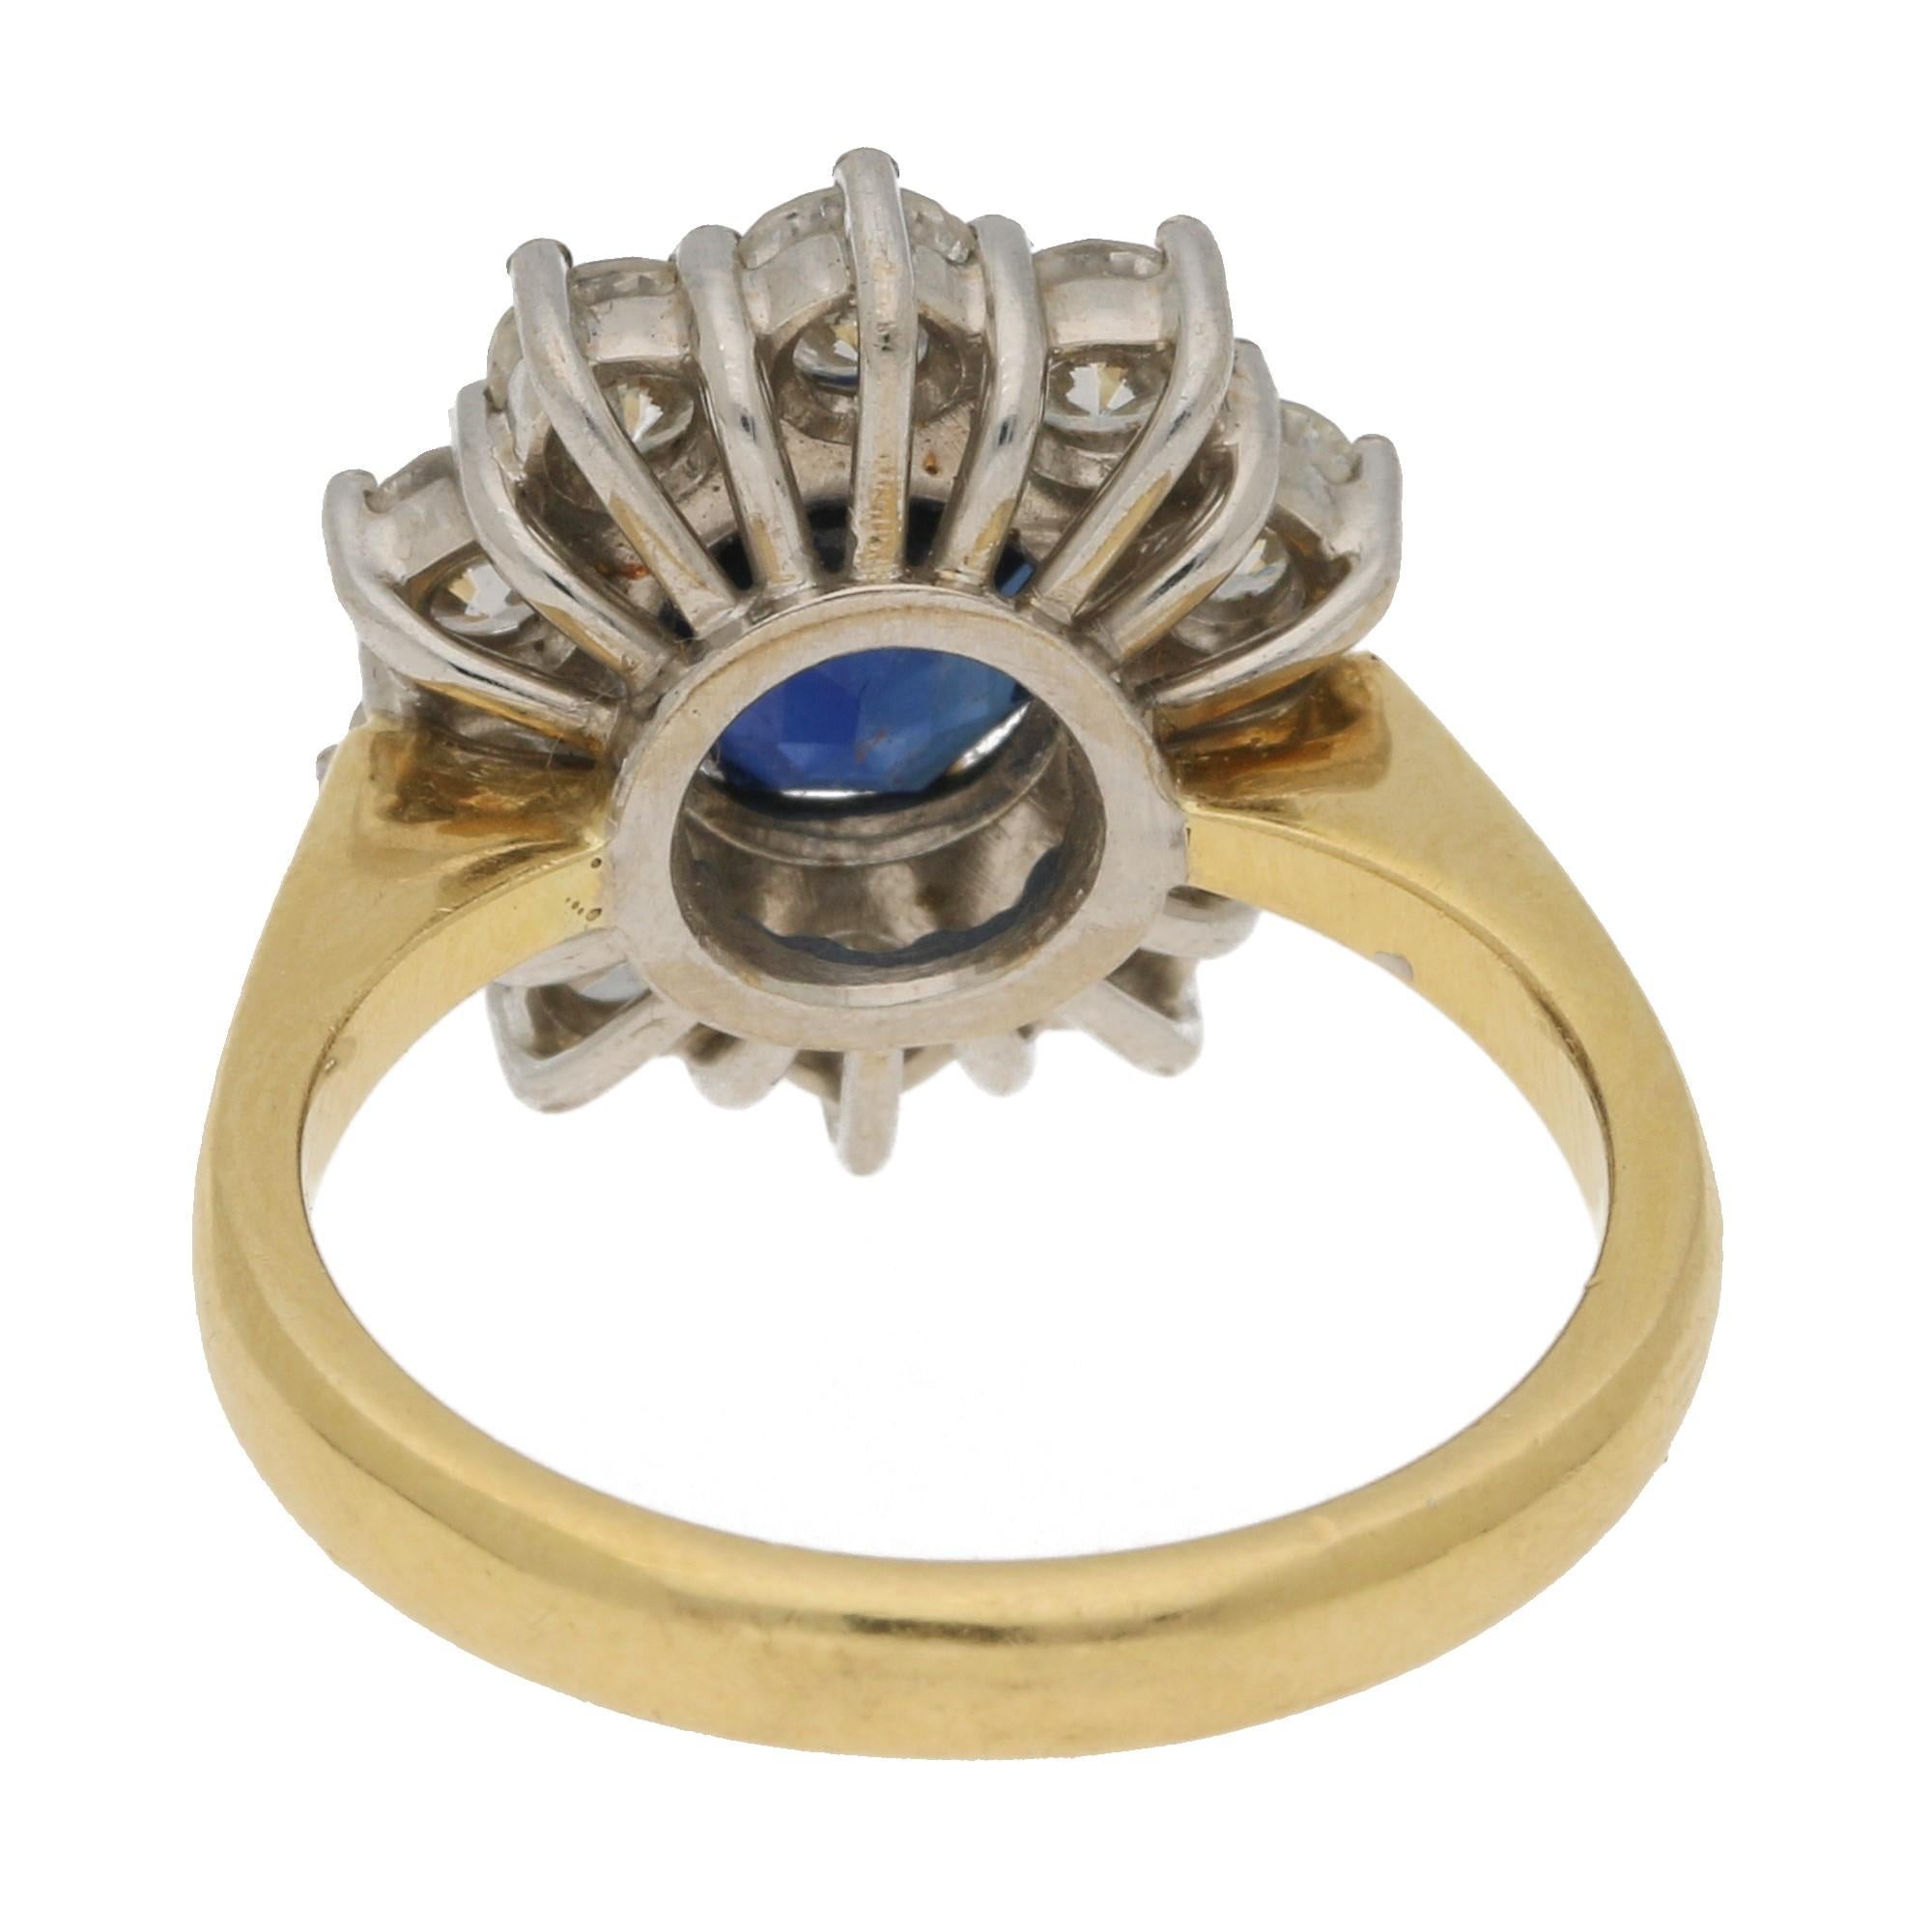 Round Cut Sapphire and Diamond Diana Style Cluster Engagement Ring in 18 Karat Yellow Gold